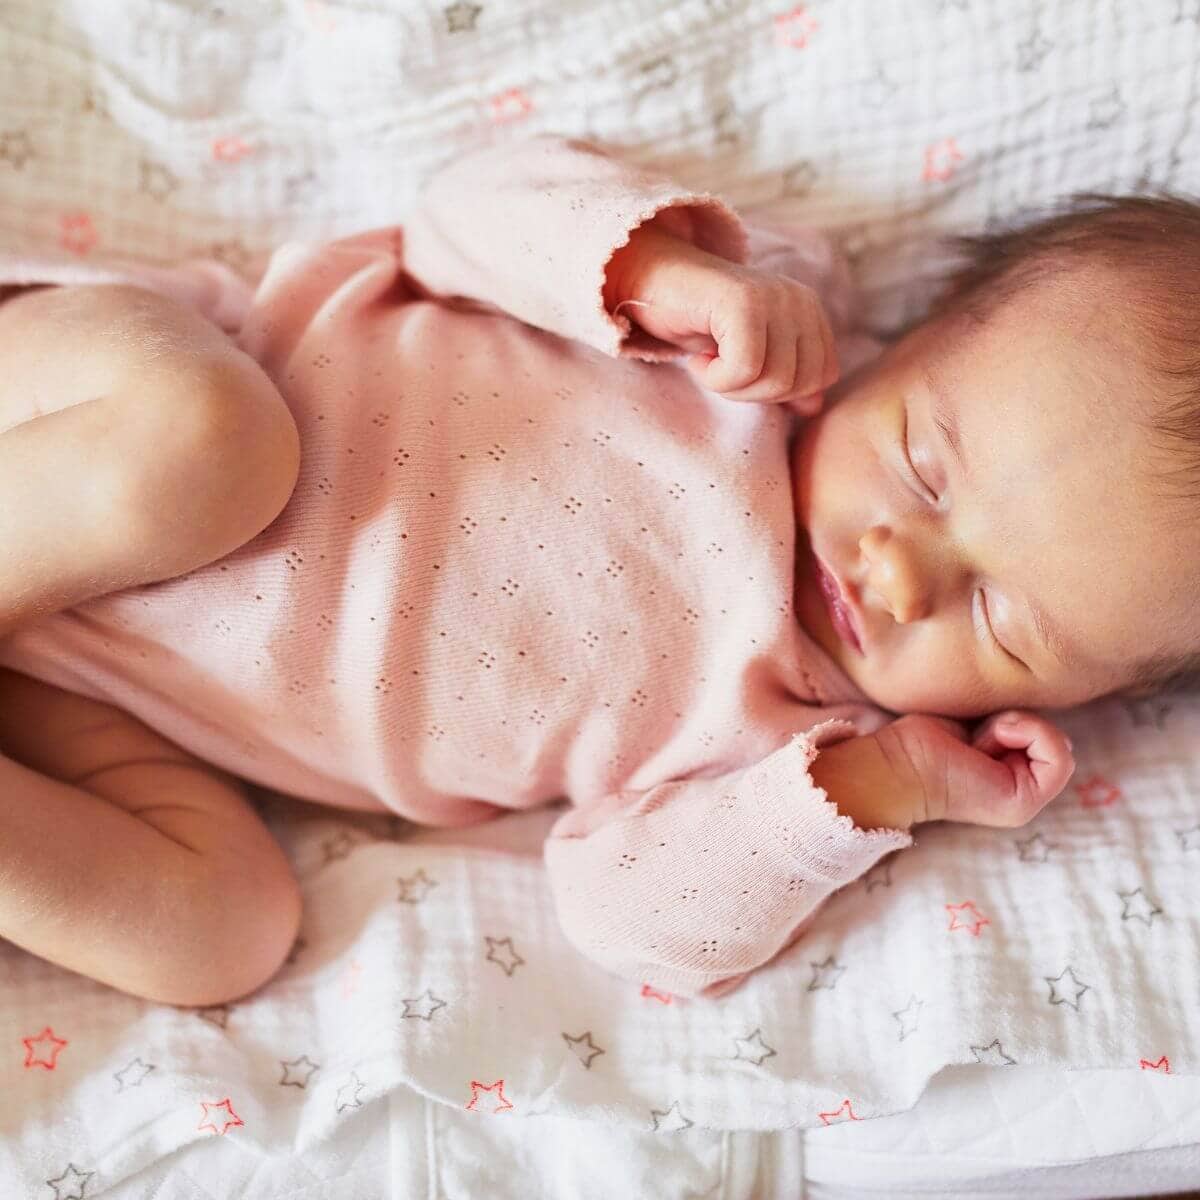 A newborn baby girl is laying on a blanket with stars on it. She is wearing a long sleeve light pink onesie with flowers cut into the fabric and she is sleeping.